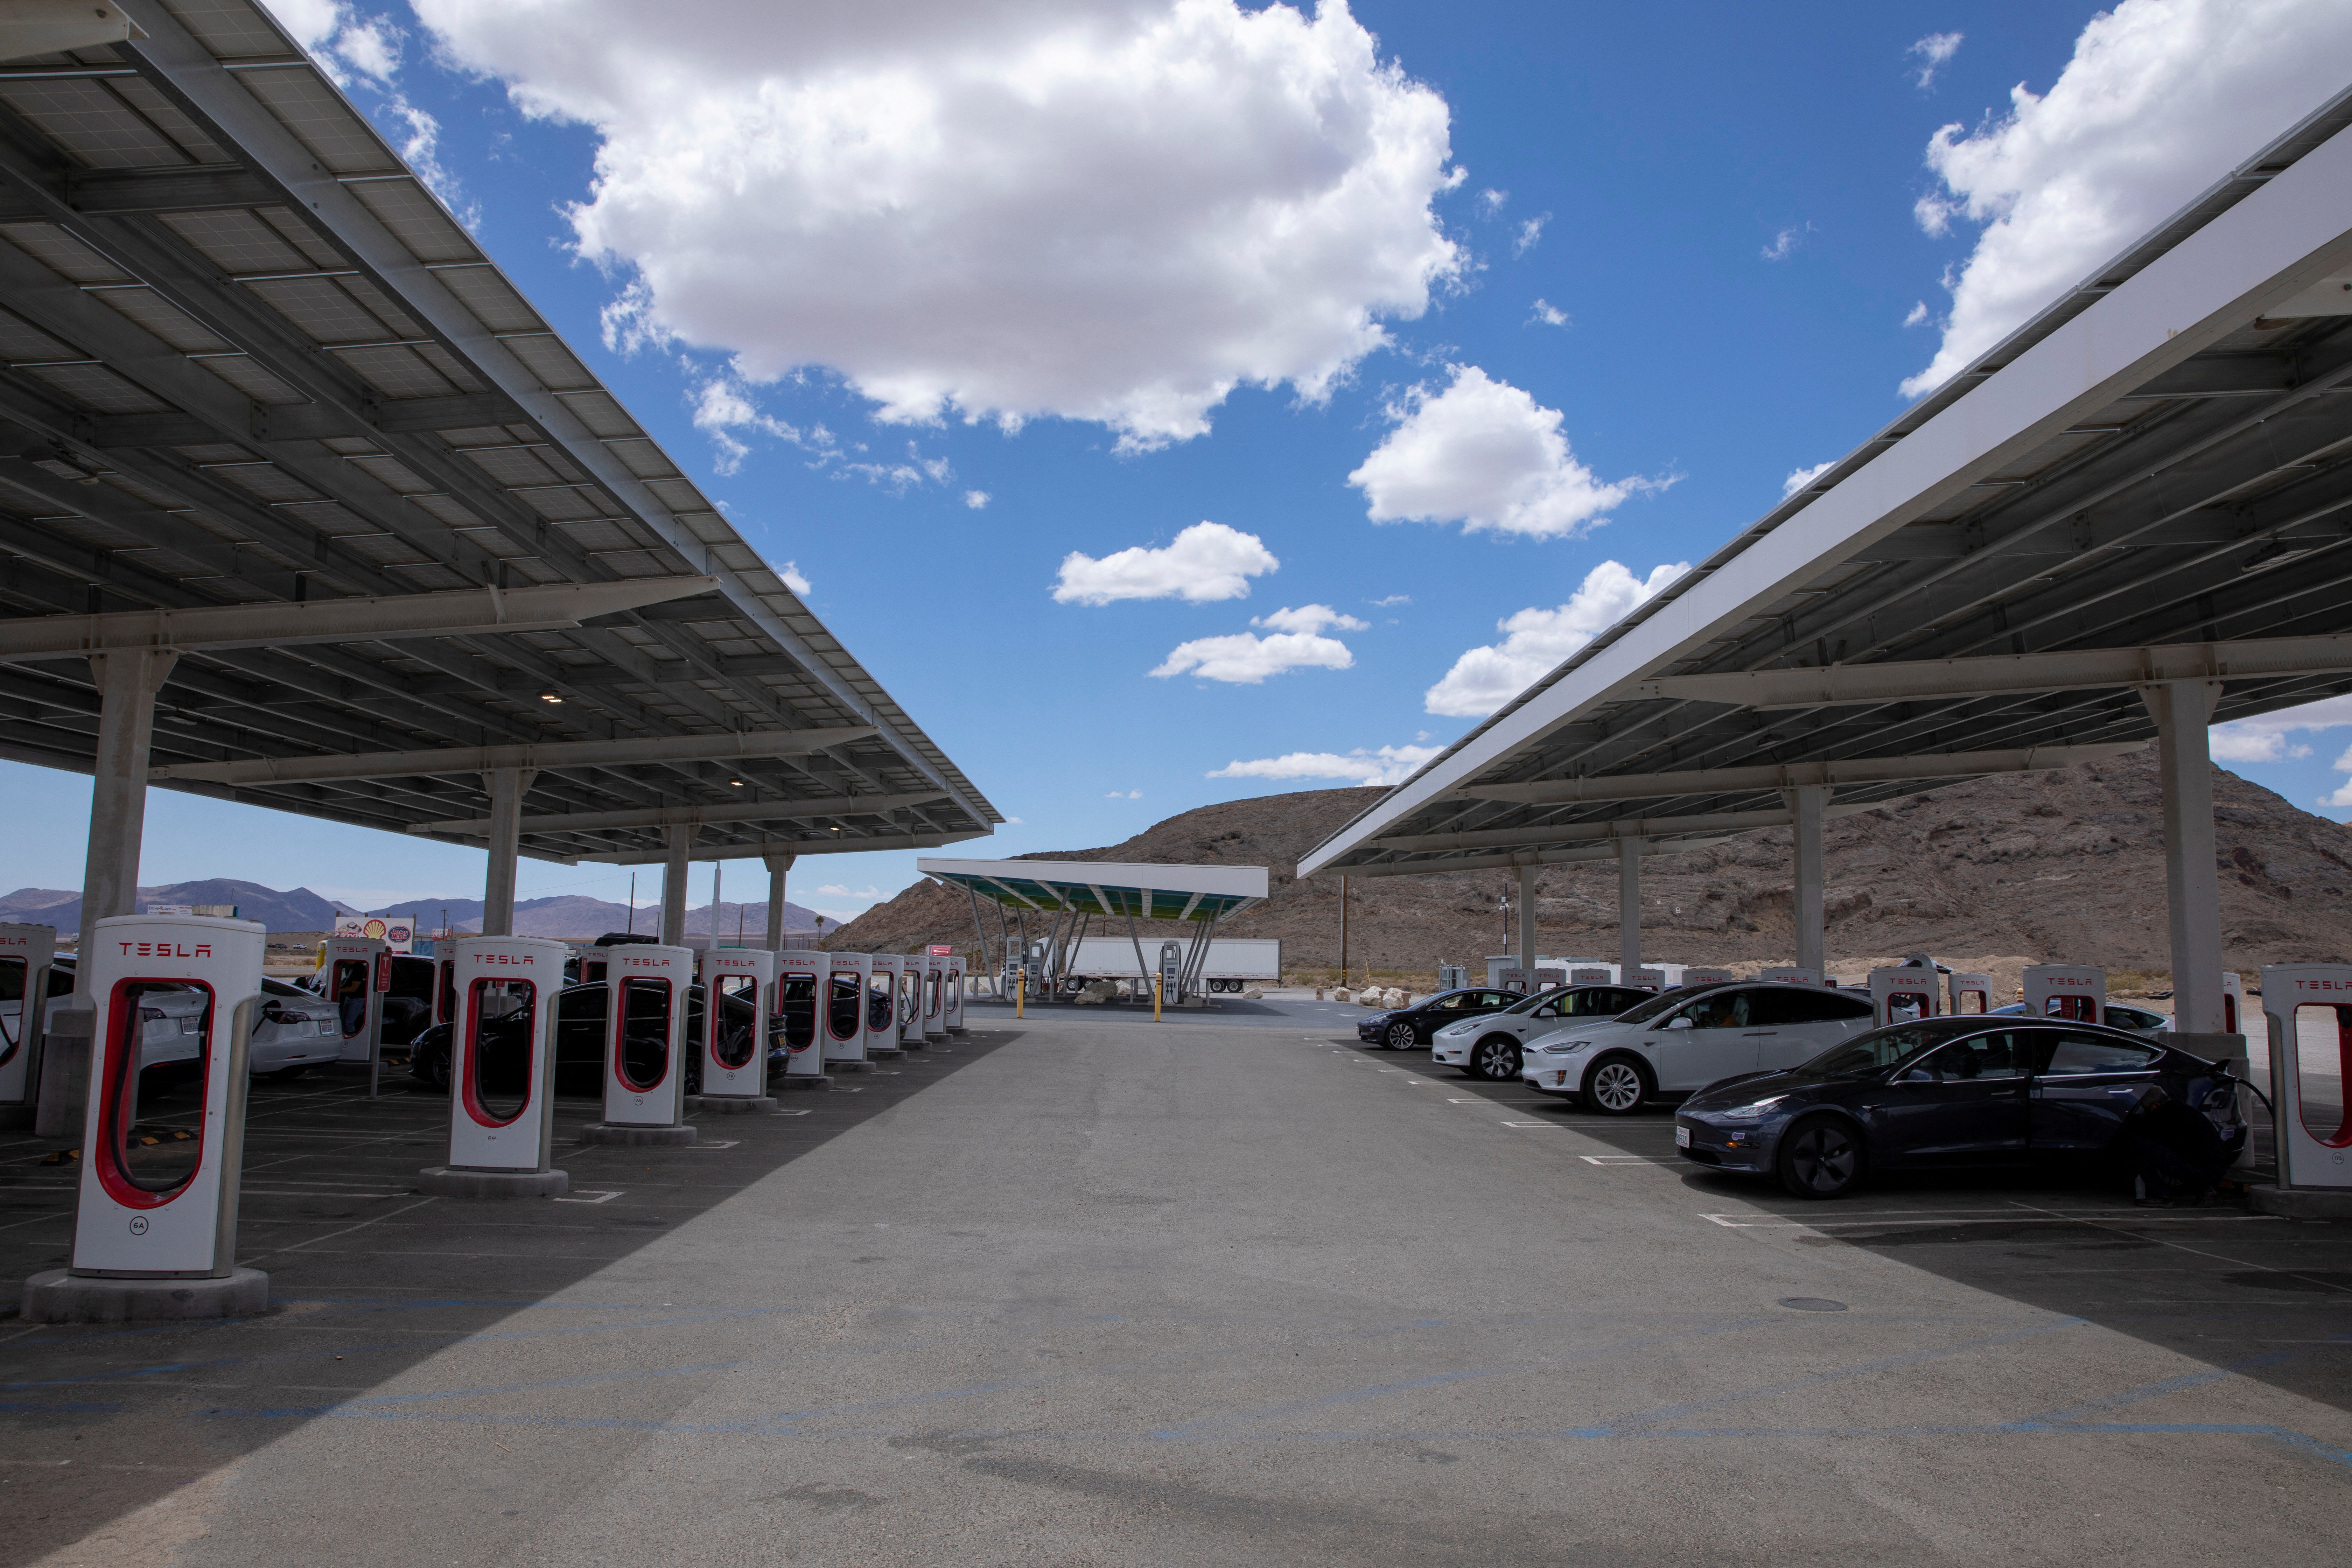 Tesla electric vehicles recharge at a large supercharging station located between Los Angeles and Las Vegas